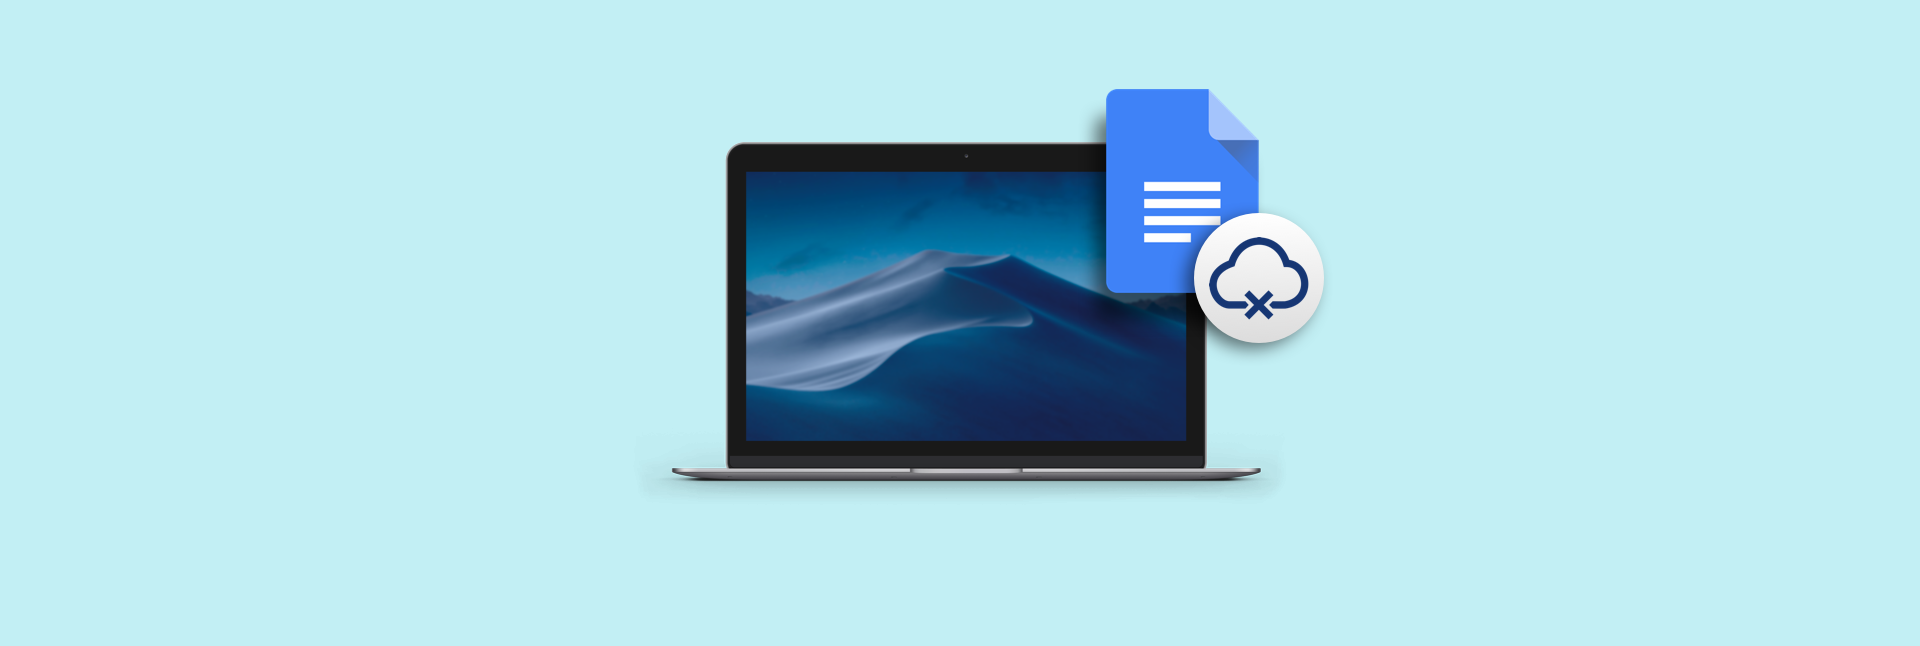 can i use google drive for mac without keeping files on my computer